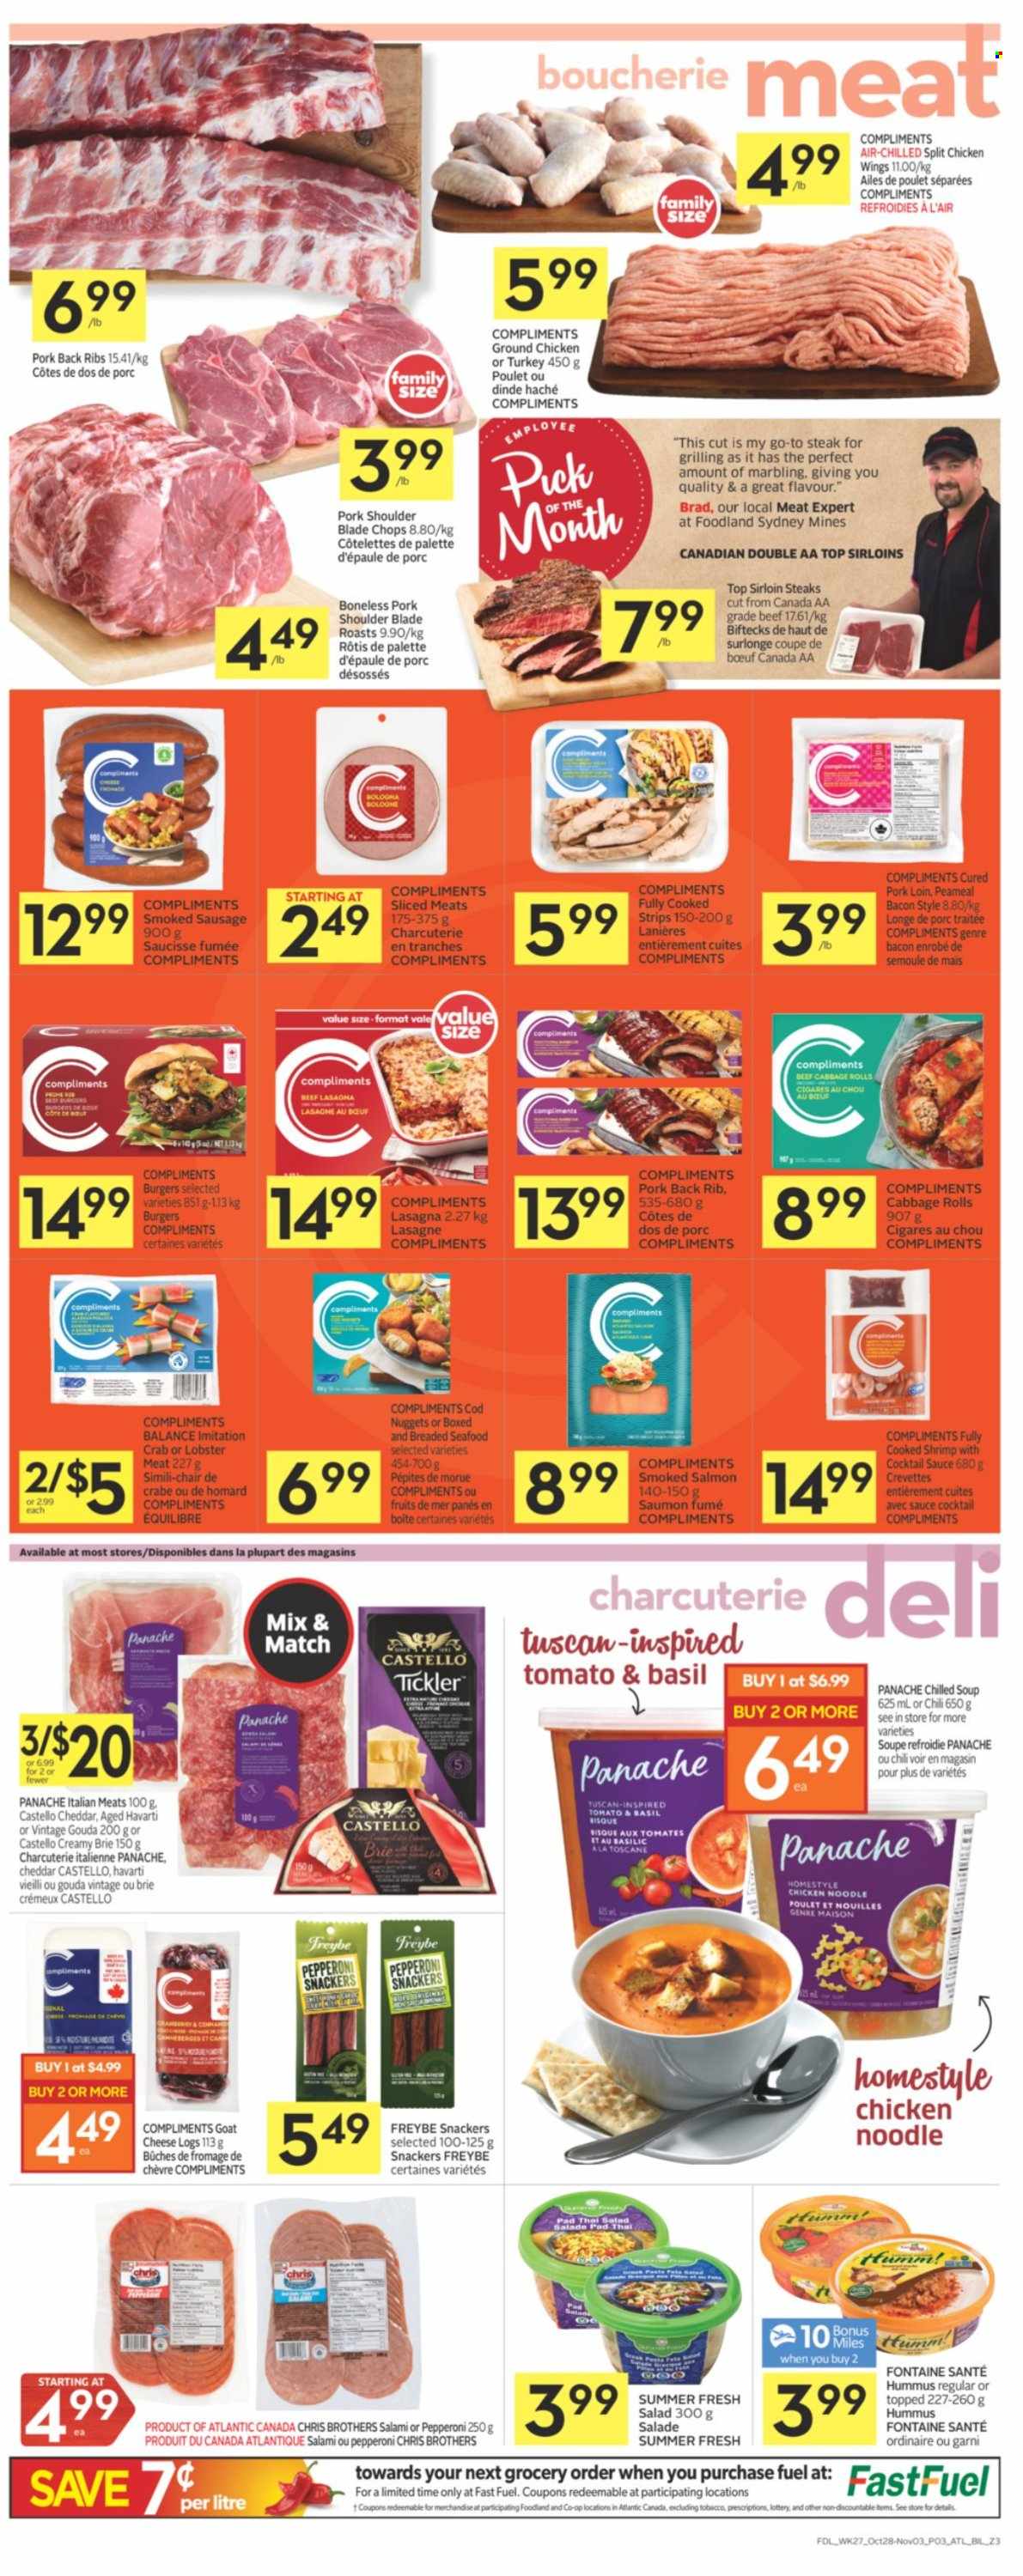 thumbnail - Co-op Flyer - October 28, 2021 - November 03, 2021 - Sales products - cabbage, salad, cod, lobster, salmon, smoked salmon, seafood, crab, shrimps, soup, nuggets, hamburger, sauce, noodles, lasagna meal, bacon, salami, sausage, smoked sausage, pepperoni, hummus, goat cheese, gouda, Havarti, cheddar, cheese, brie, chicken wings, strips, cocktail sauce, BROTHERS, ground chicken, chicken, sirloin steak, pork loin, pork meat, pork ribs, pork shoulder, pork back ribs, steak. Page 3.